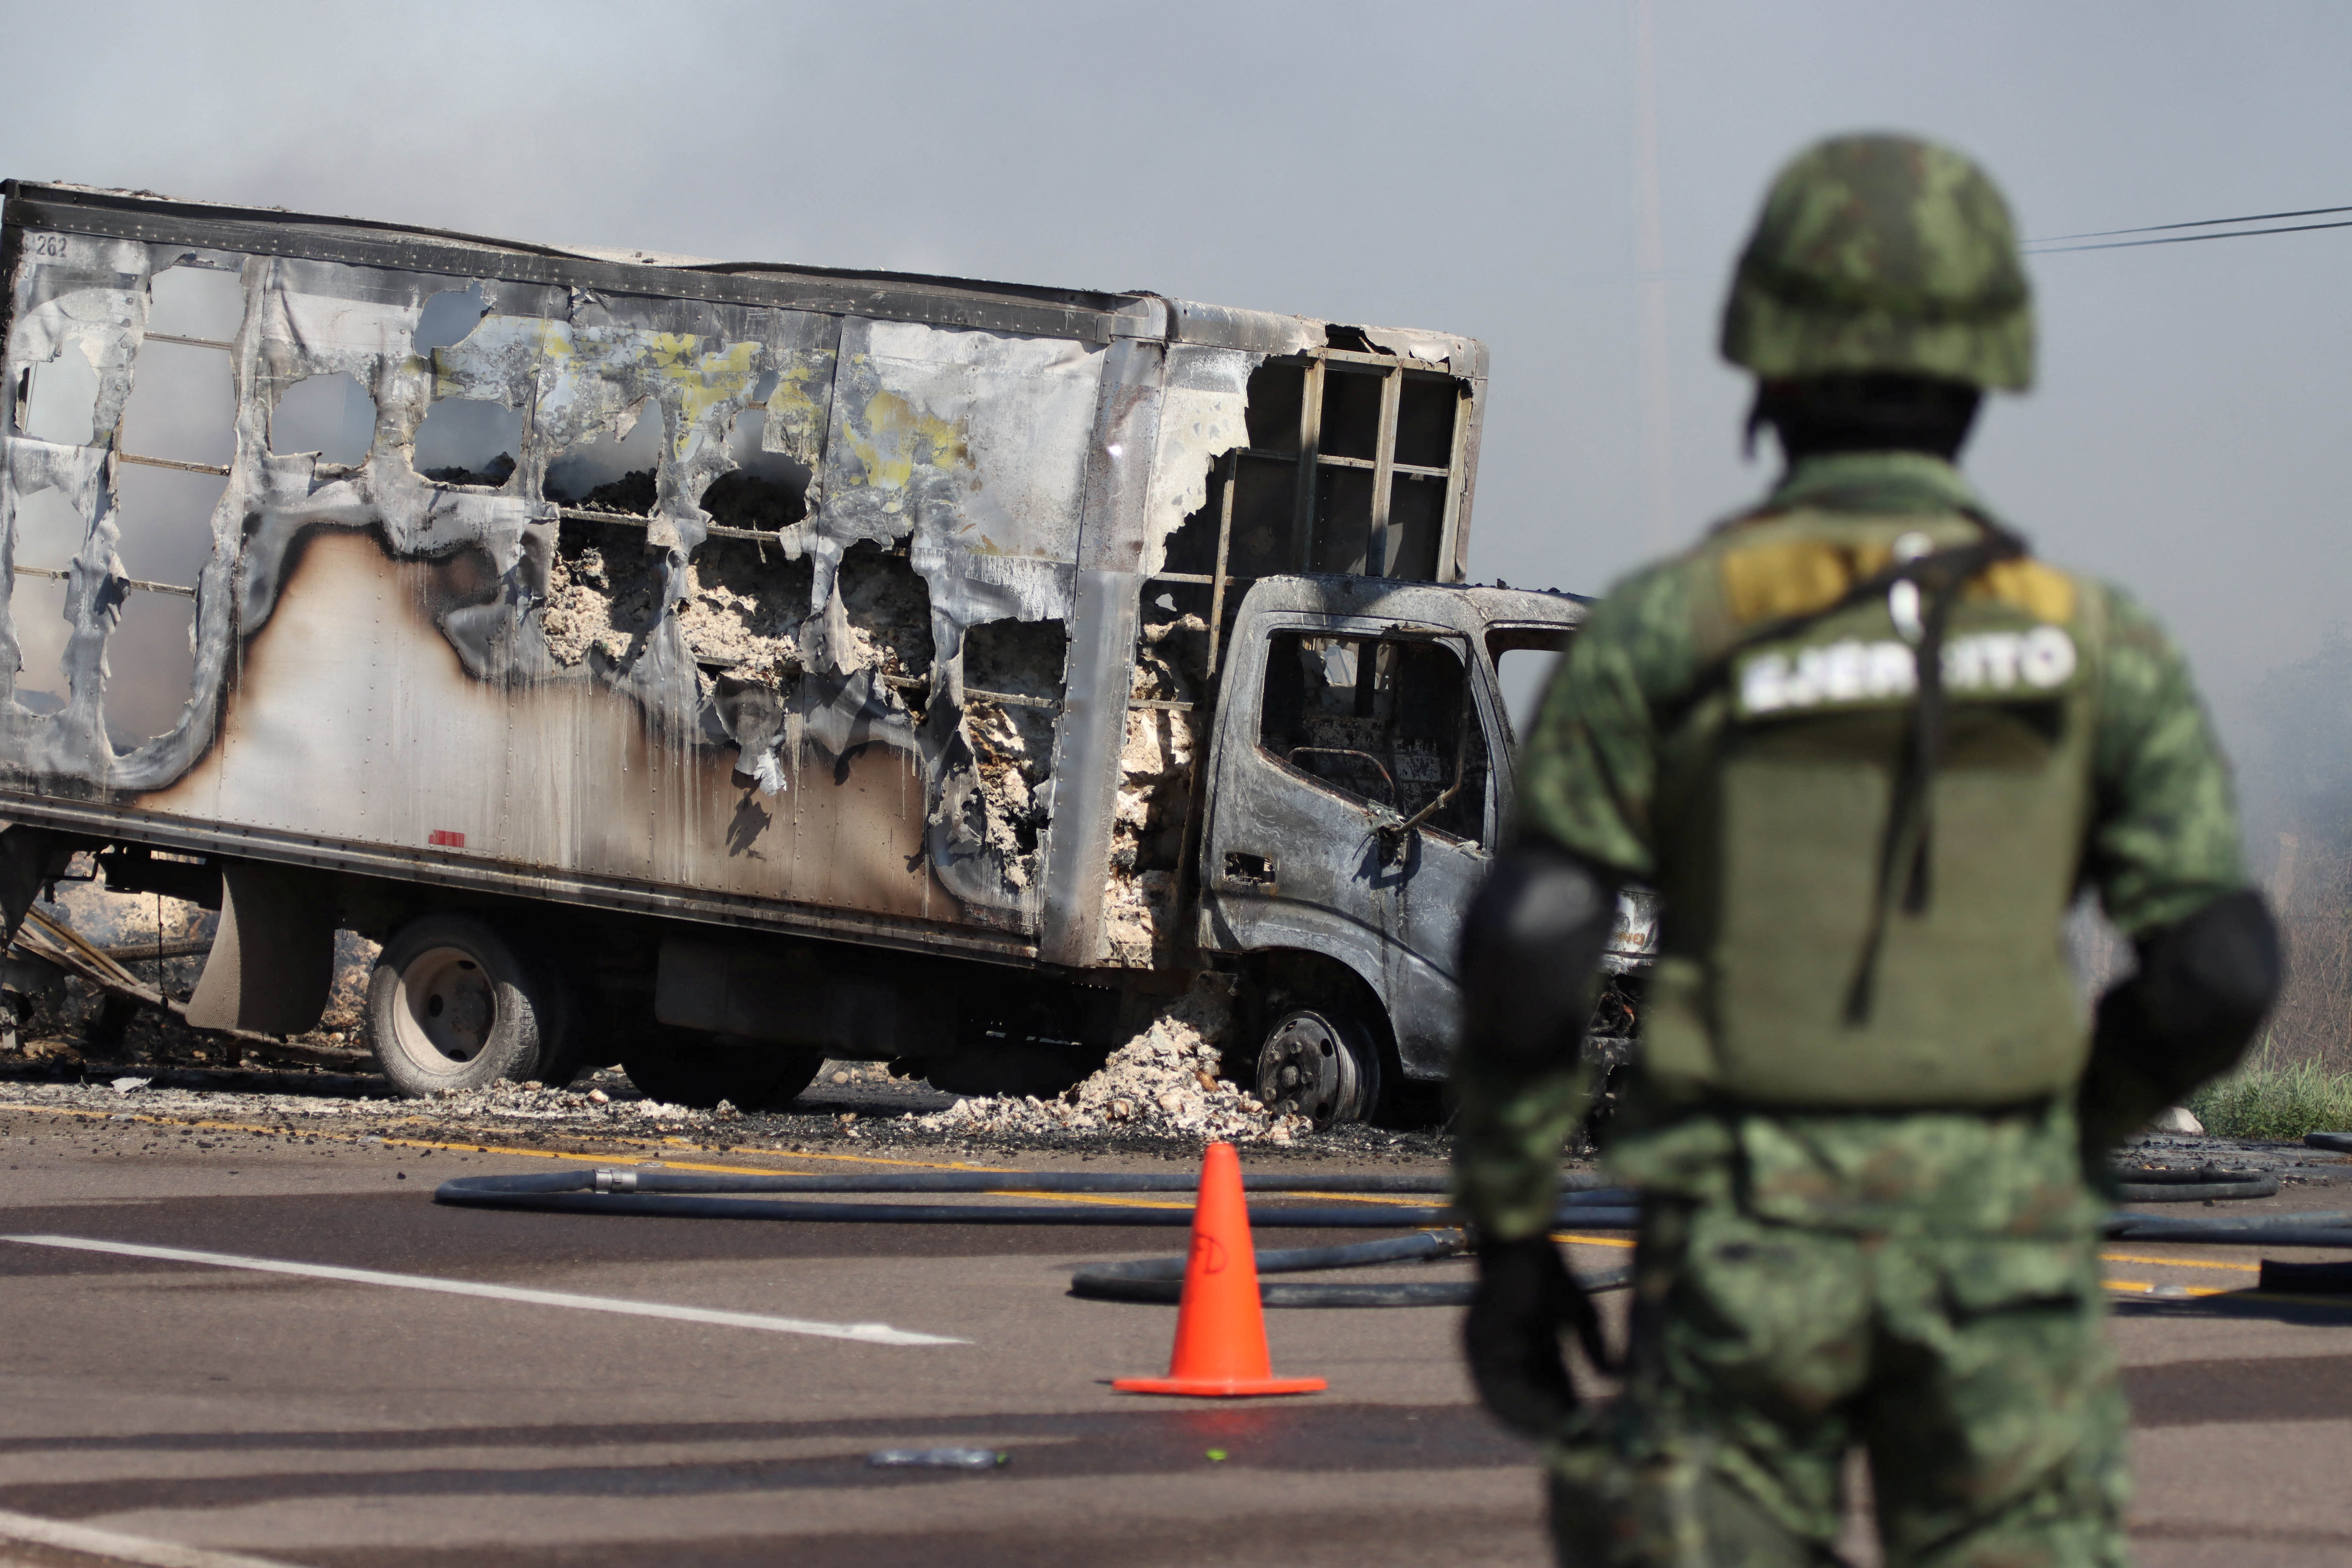 Culiacán stopped its activities completely because the violence increased severely after the arrest of the son of Chapo Guzman (REUTERS / Stringer)